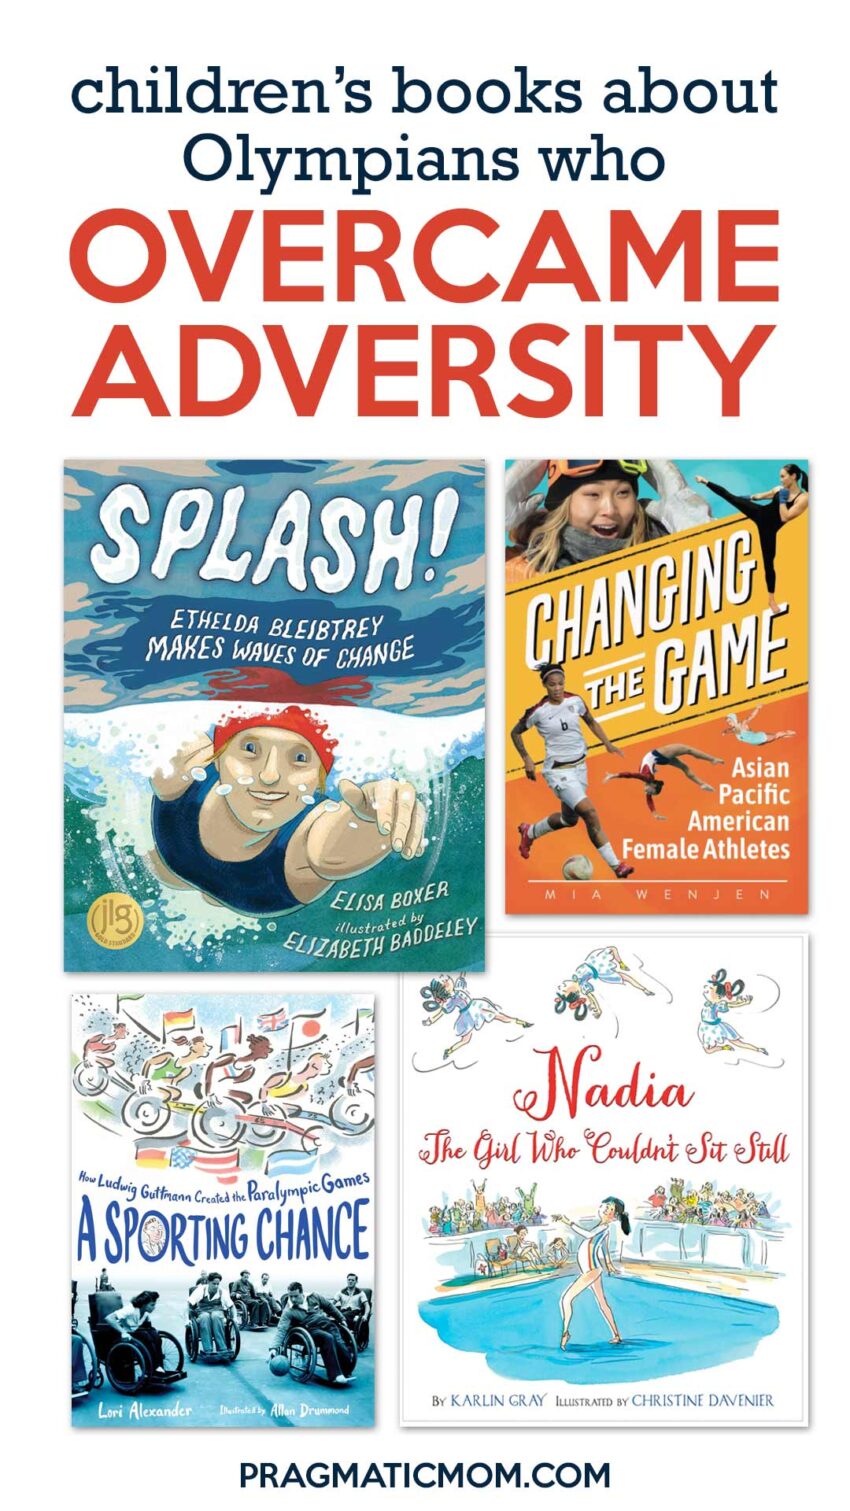 5 Children's Books of Olympians Who Overcame Adversity